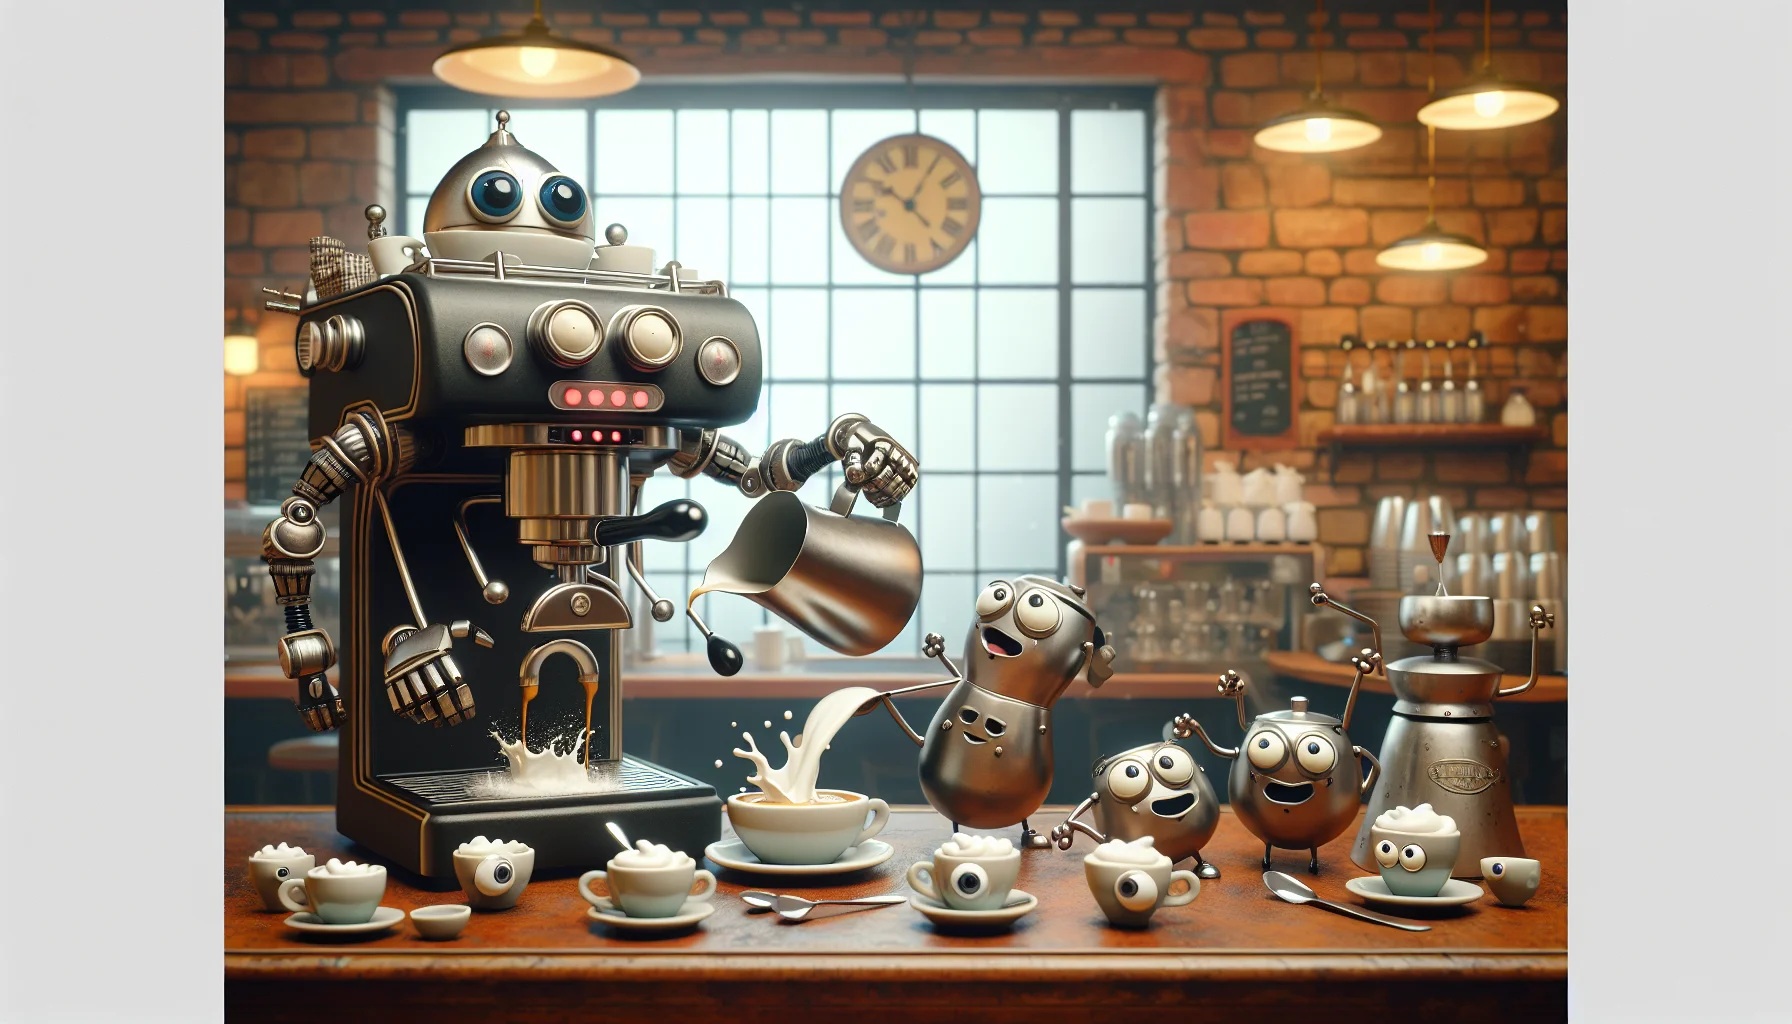 Imagine an amusing scene unfolding in a traditional coffee shop. In the forefront, an espresso machine, resembling an overly muscular anthropomorphic robot, is energetically pulling shots of espresso. Nearby, a milk frother with big googly eyes seems to be dancing with a steel pitcher, creating seamlessly frothy milk. On the counter, a set of quaint cups, spoons, and a coffee scale look on with comical faces. The atmosphere is heartwarming, inviting everyone to savor the process and joy of espresso brewing.